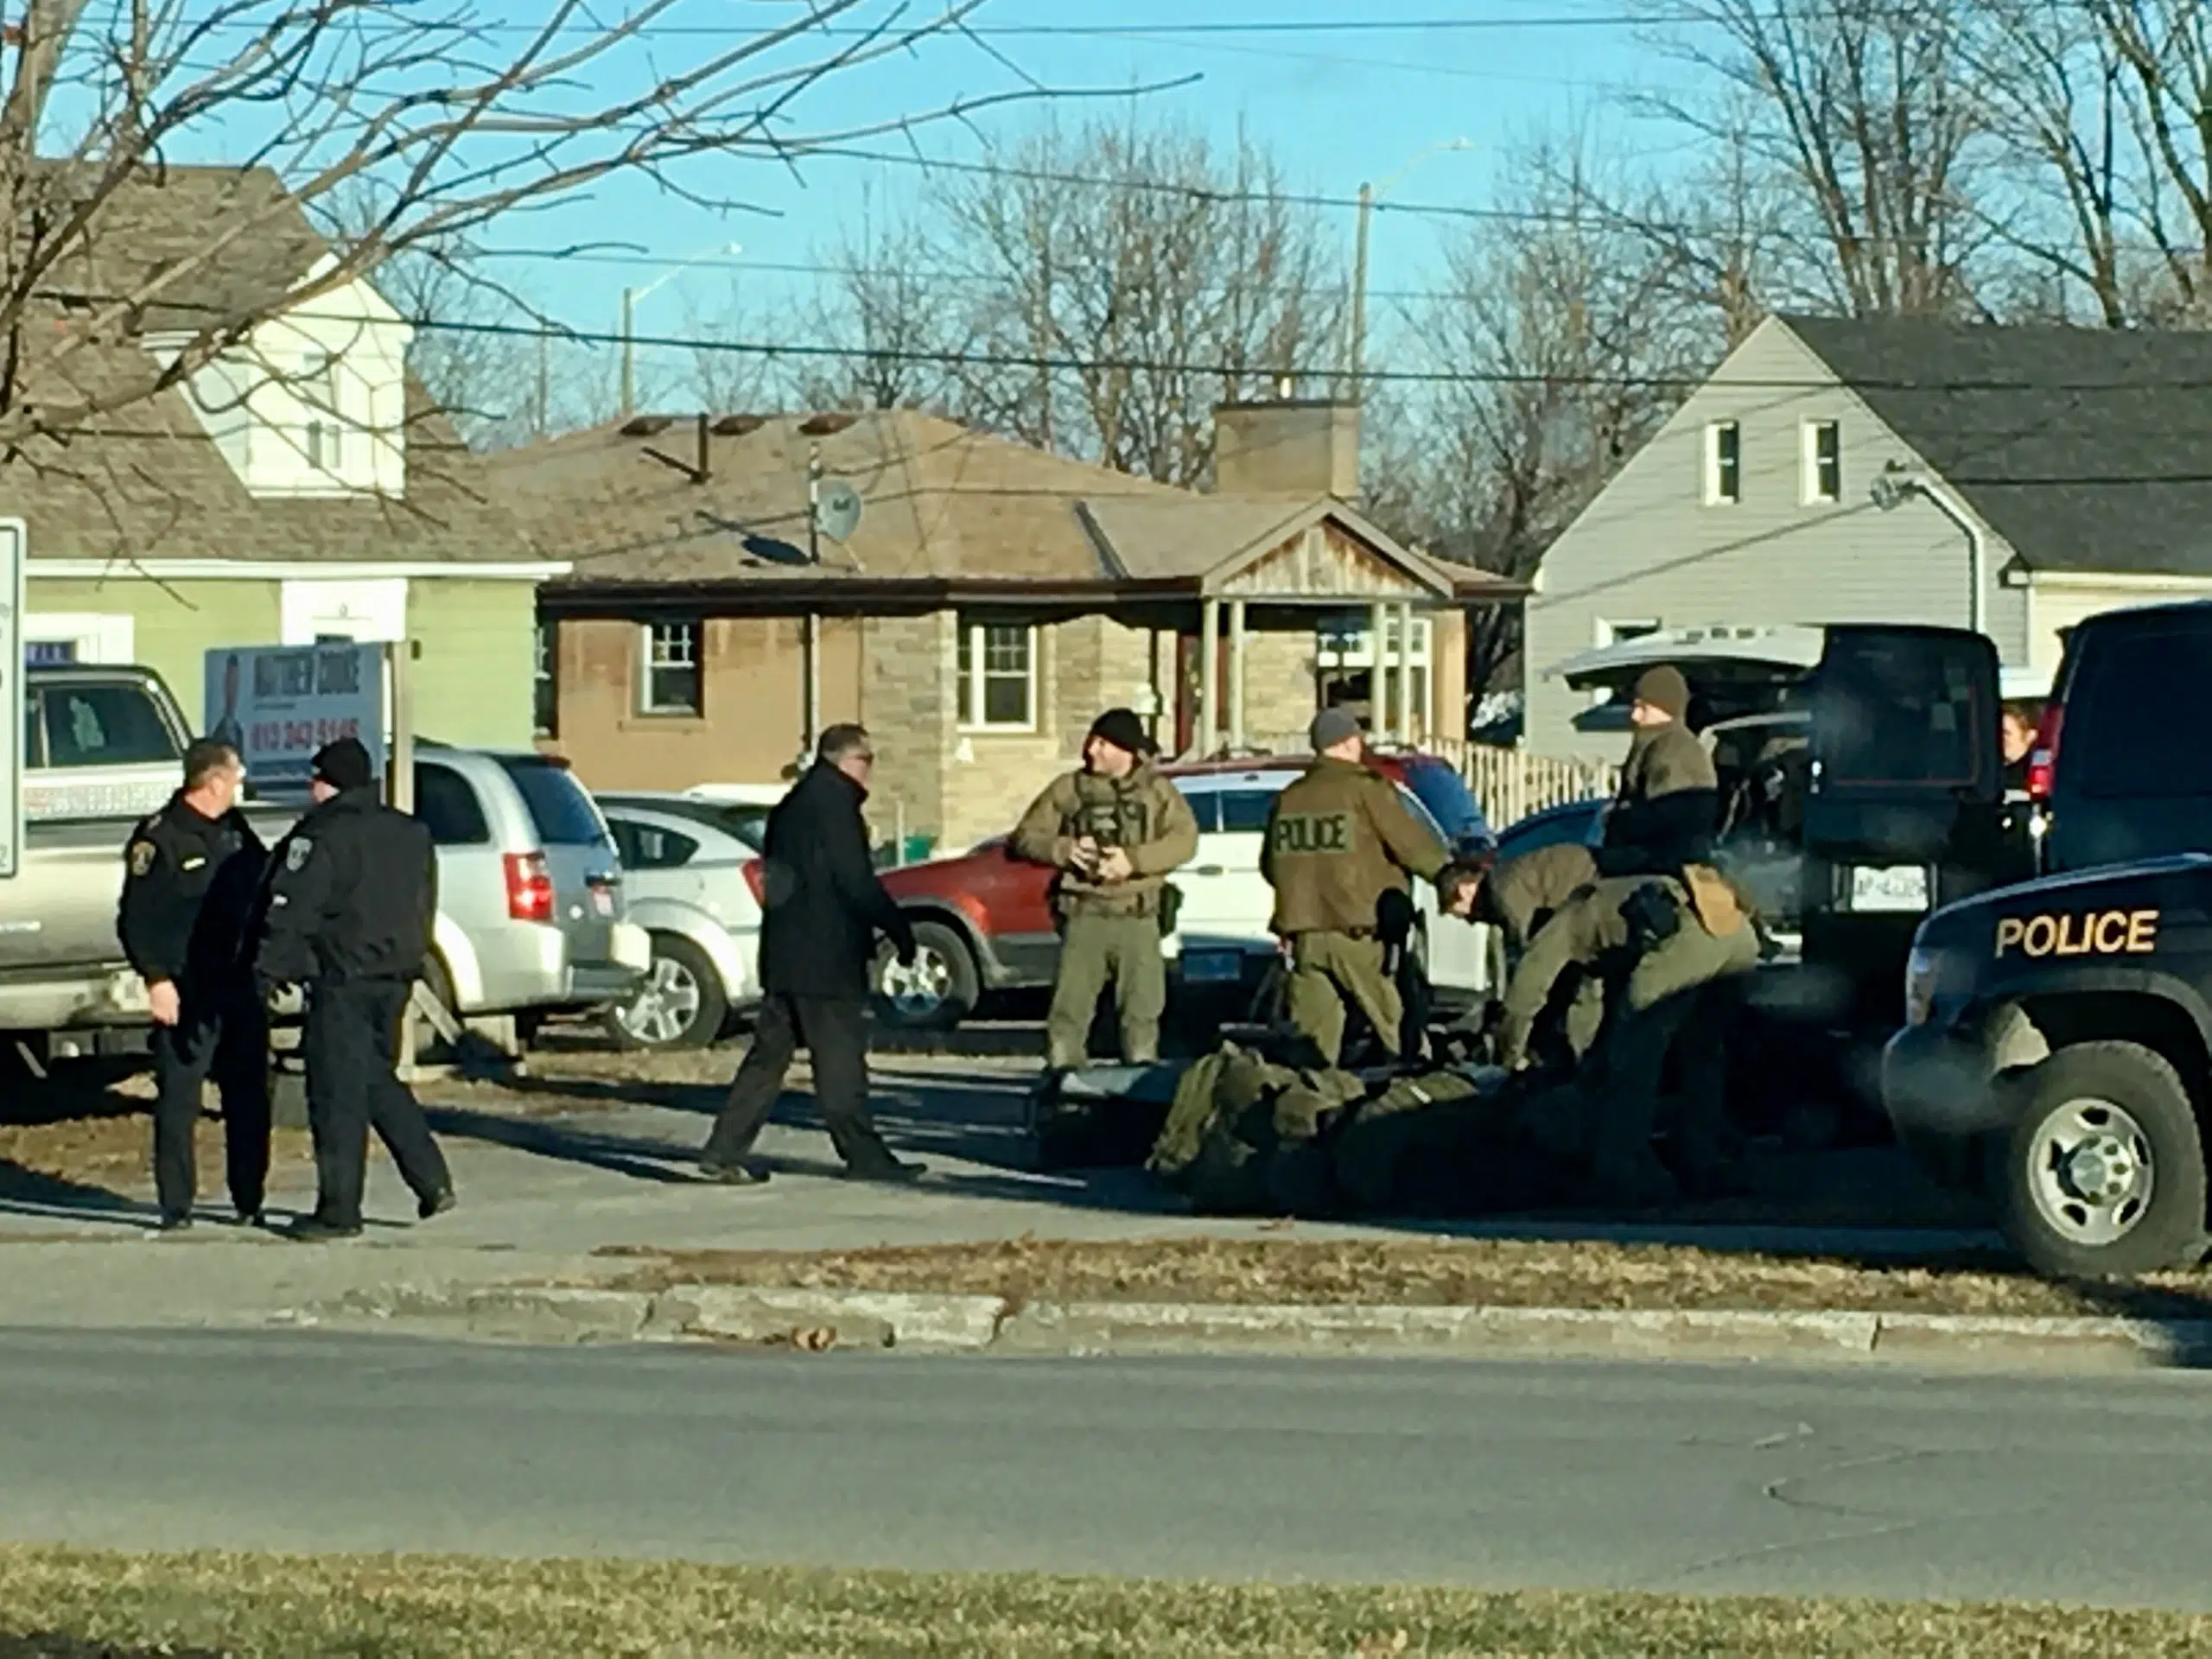 UPDATE: Serious incident in Belleville ends safely